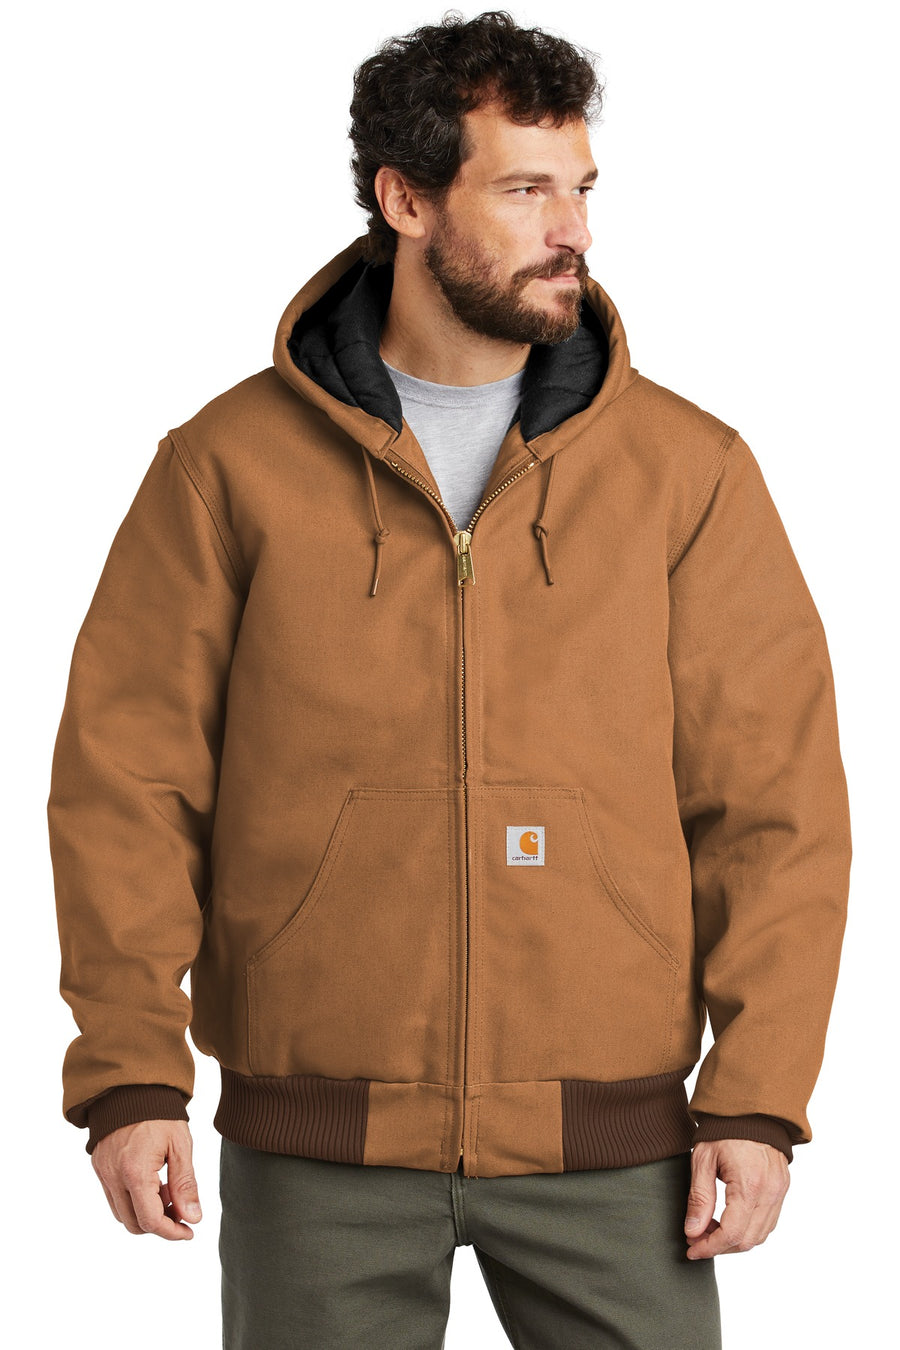 Carhartt Tall Quilted-Flannel-Lined Duck Active Jac.